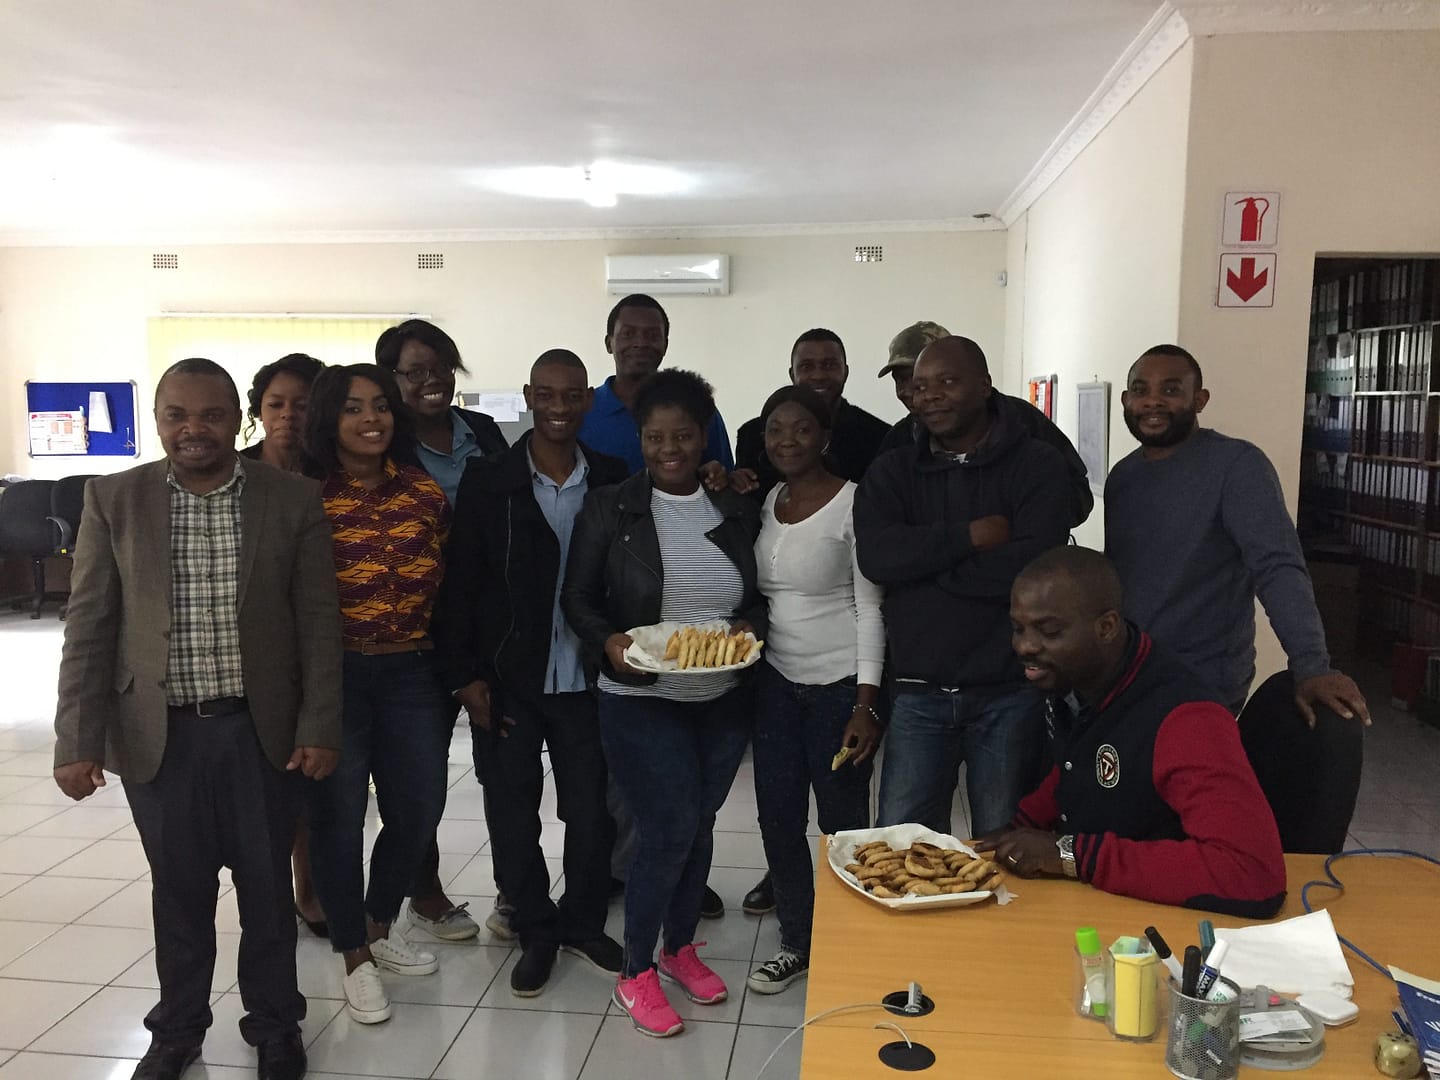 On her last day of the fellowship, Ankita brought in some home made food so that she could share a meal with her awesome colleagues at Zambian Governance Foundation.